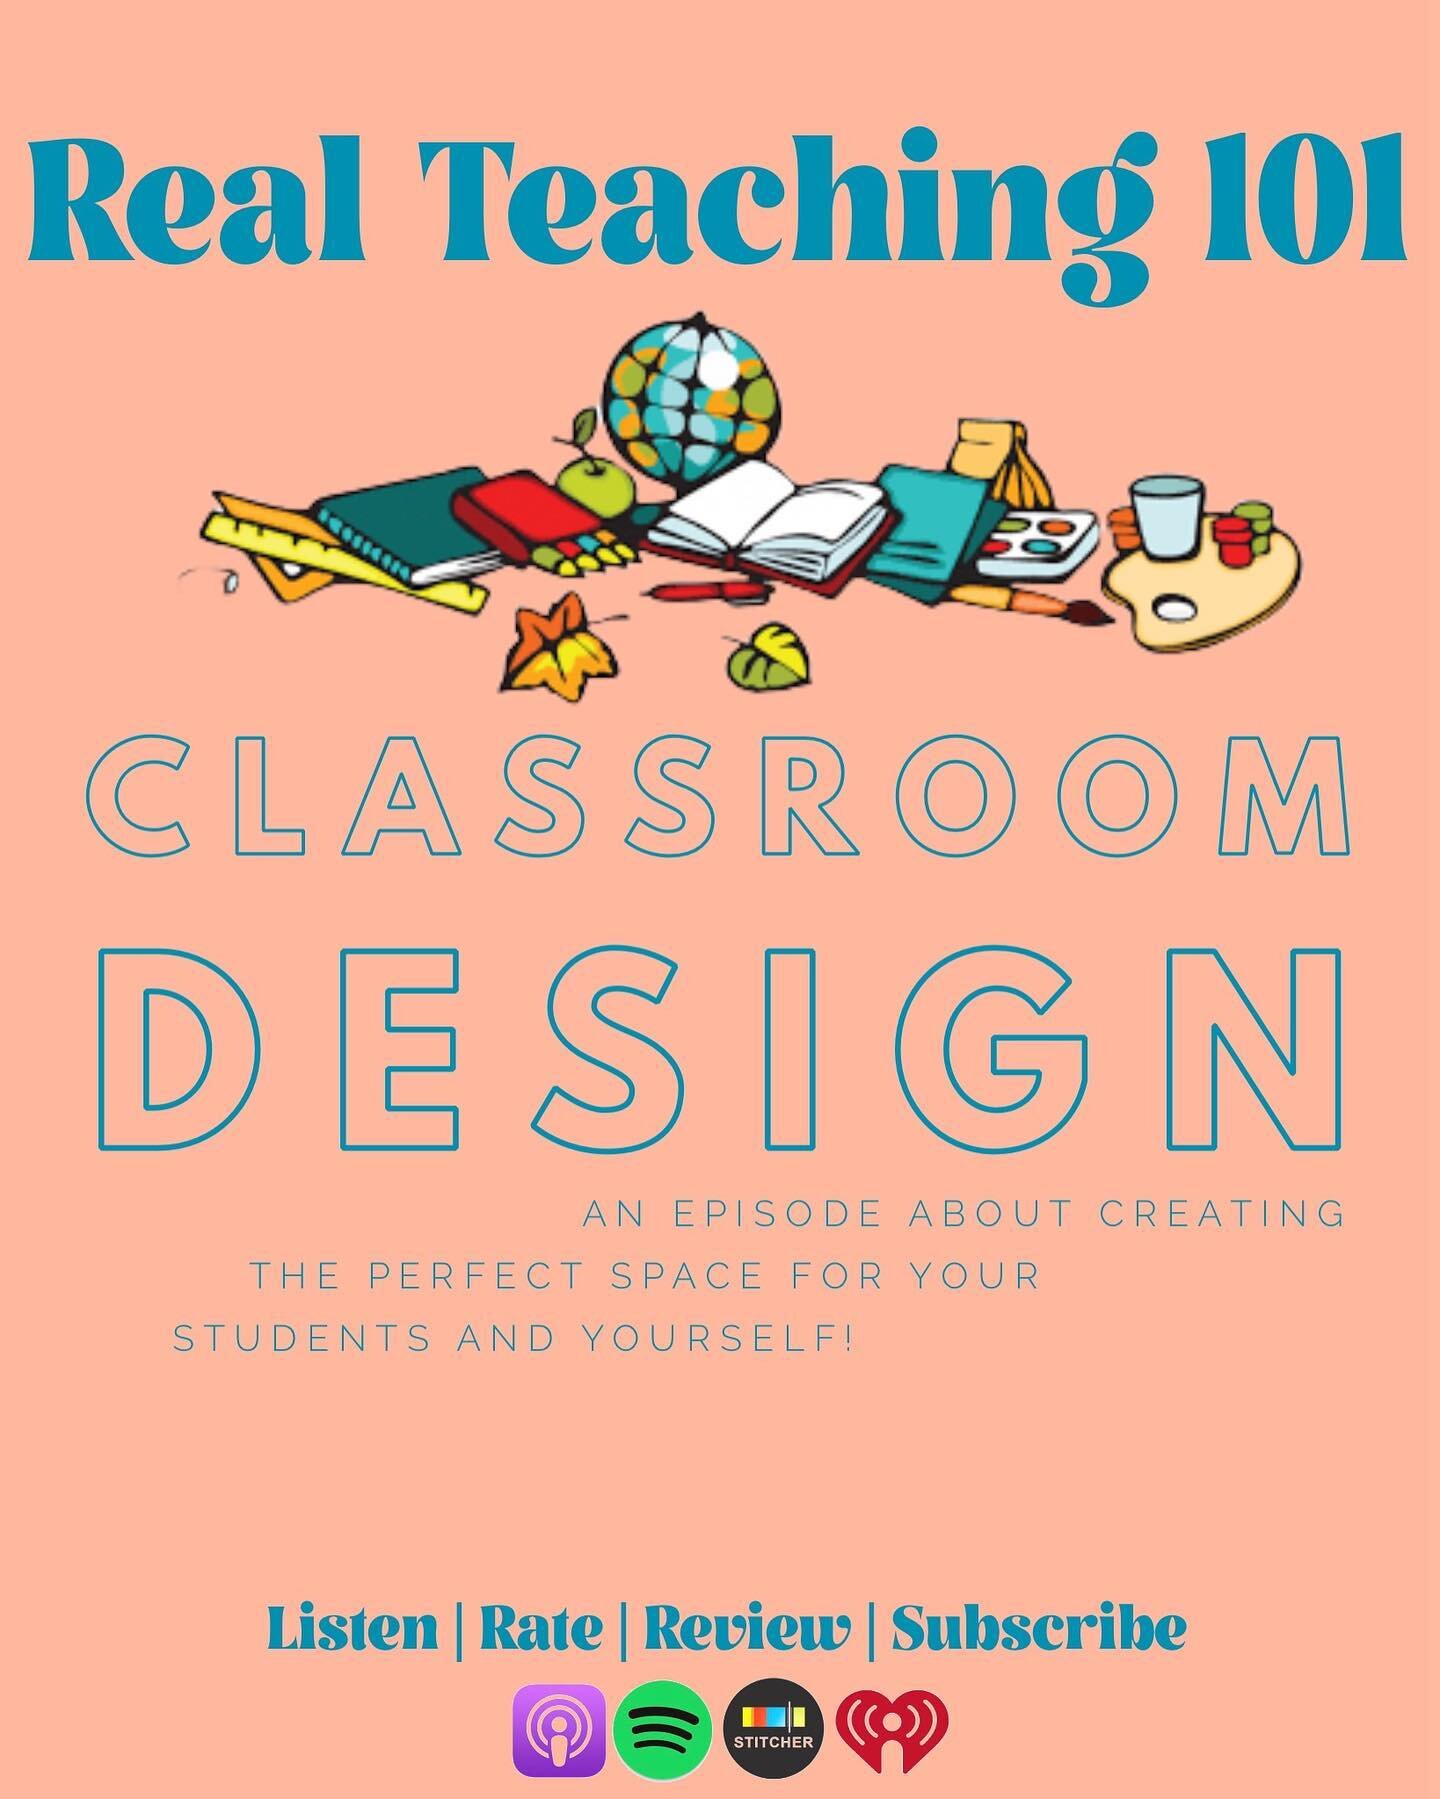 Anyone else have classroom design on their mind? {You can bet that Meagan does!}

In this episode we chat about classroom design considerations, and ways to decorate a classroom on a budget. 

We'd love to hear your design tips and tricks, please ema